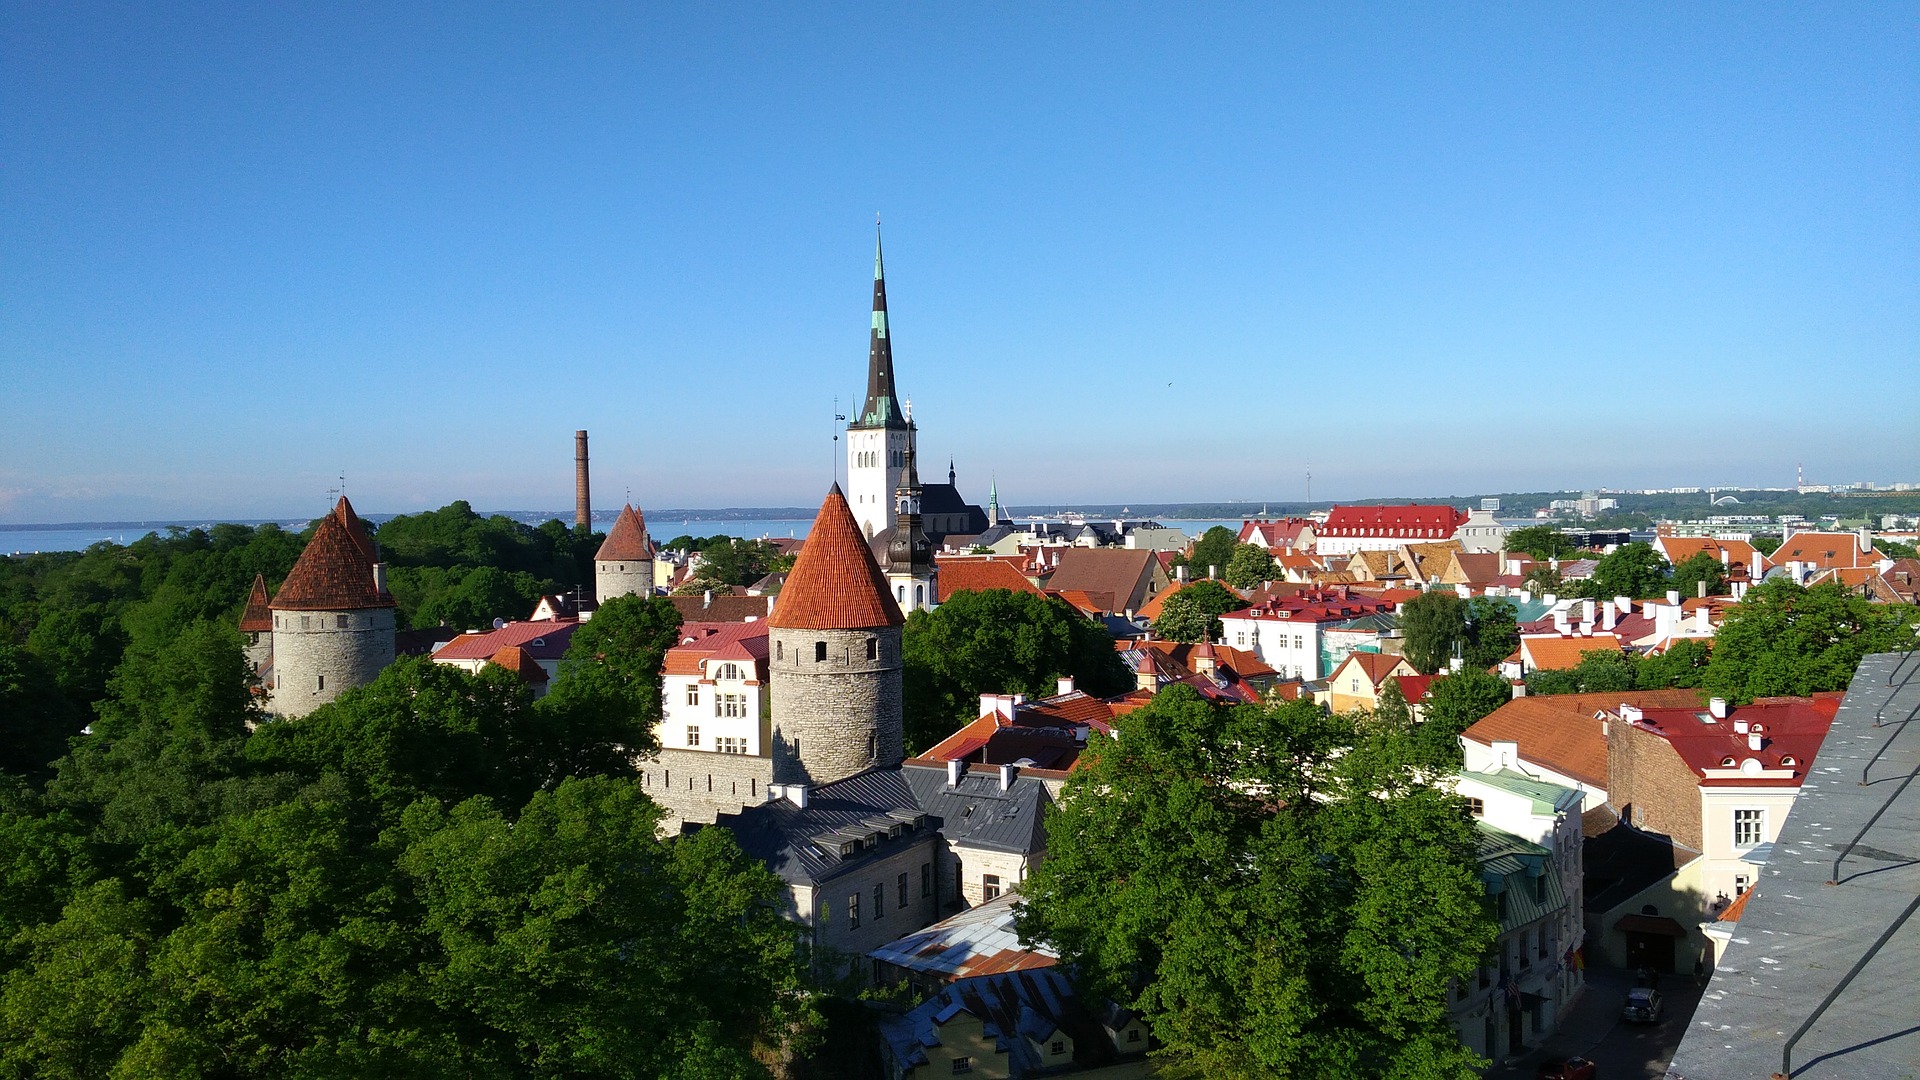 <p>Estonia is a beautiful country where you will not run out of money. To get advantageous rates in its capital Tallinn, you will have to move (a little) away from the city centre. Getting a room with a good quality/price ratio can cost about 10-20 dollars a night.</p>